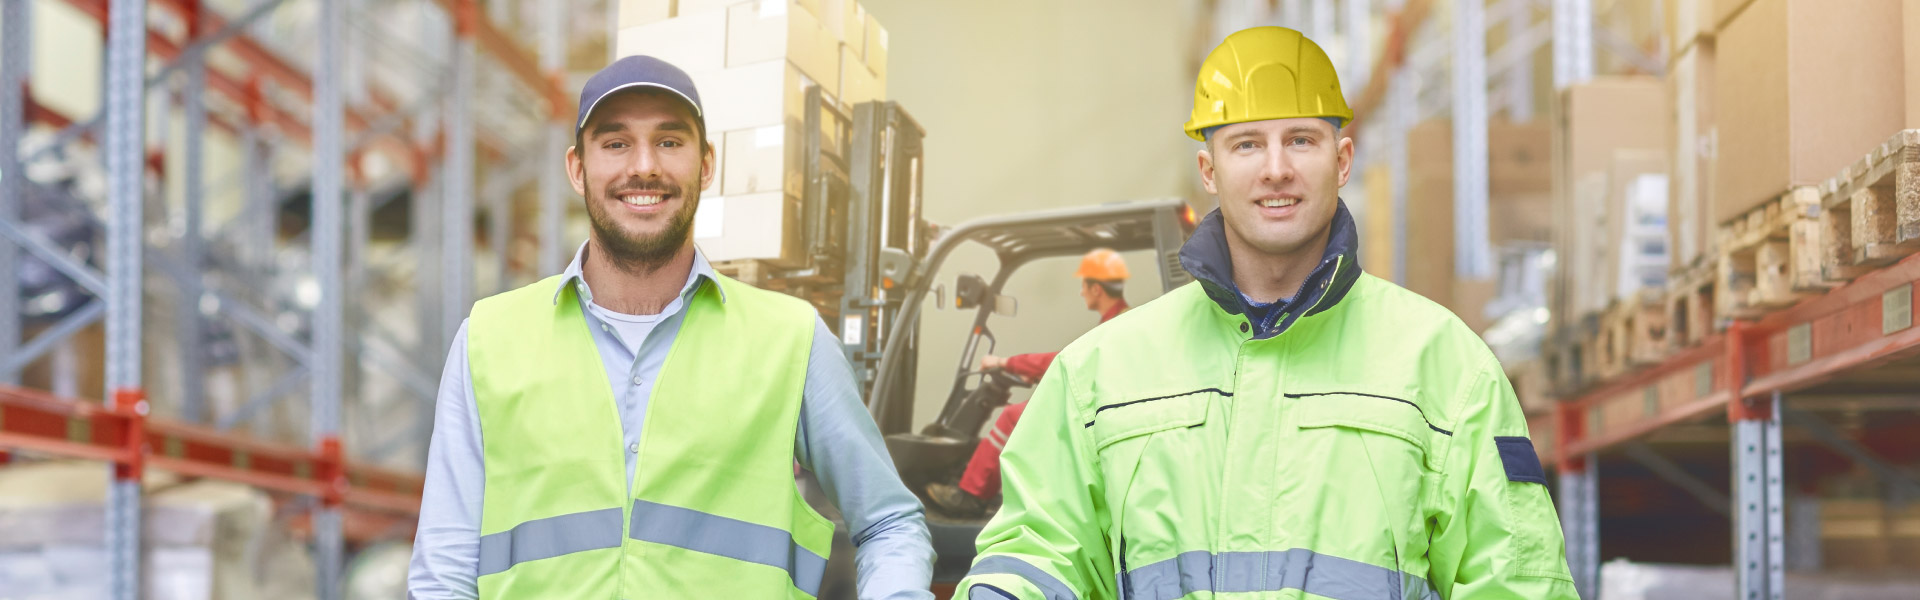 Creating a Workplace Culture of Safety and Efficiency for Materials Handling